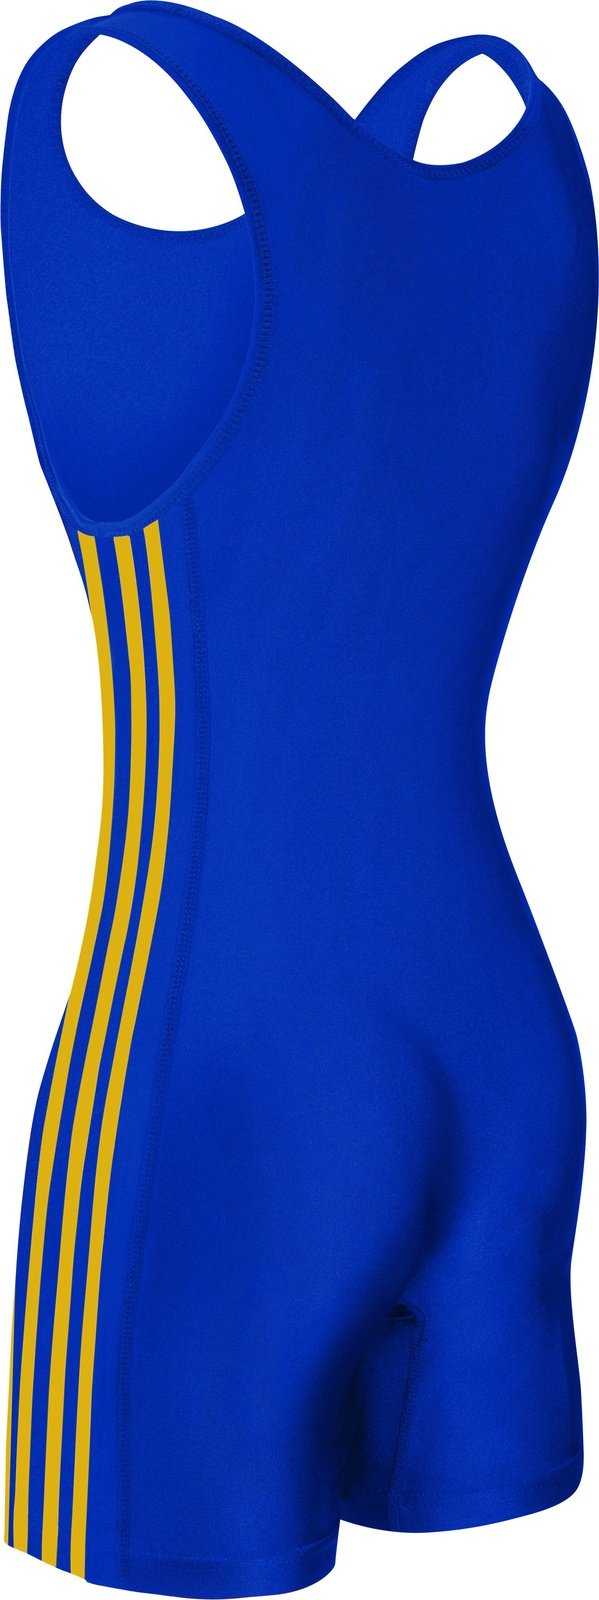 Adidas aS102s 3 Stripe Wrestling Singlet - Royal Athletic Gold - HIT a Double